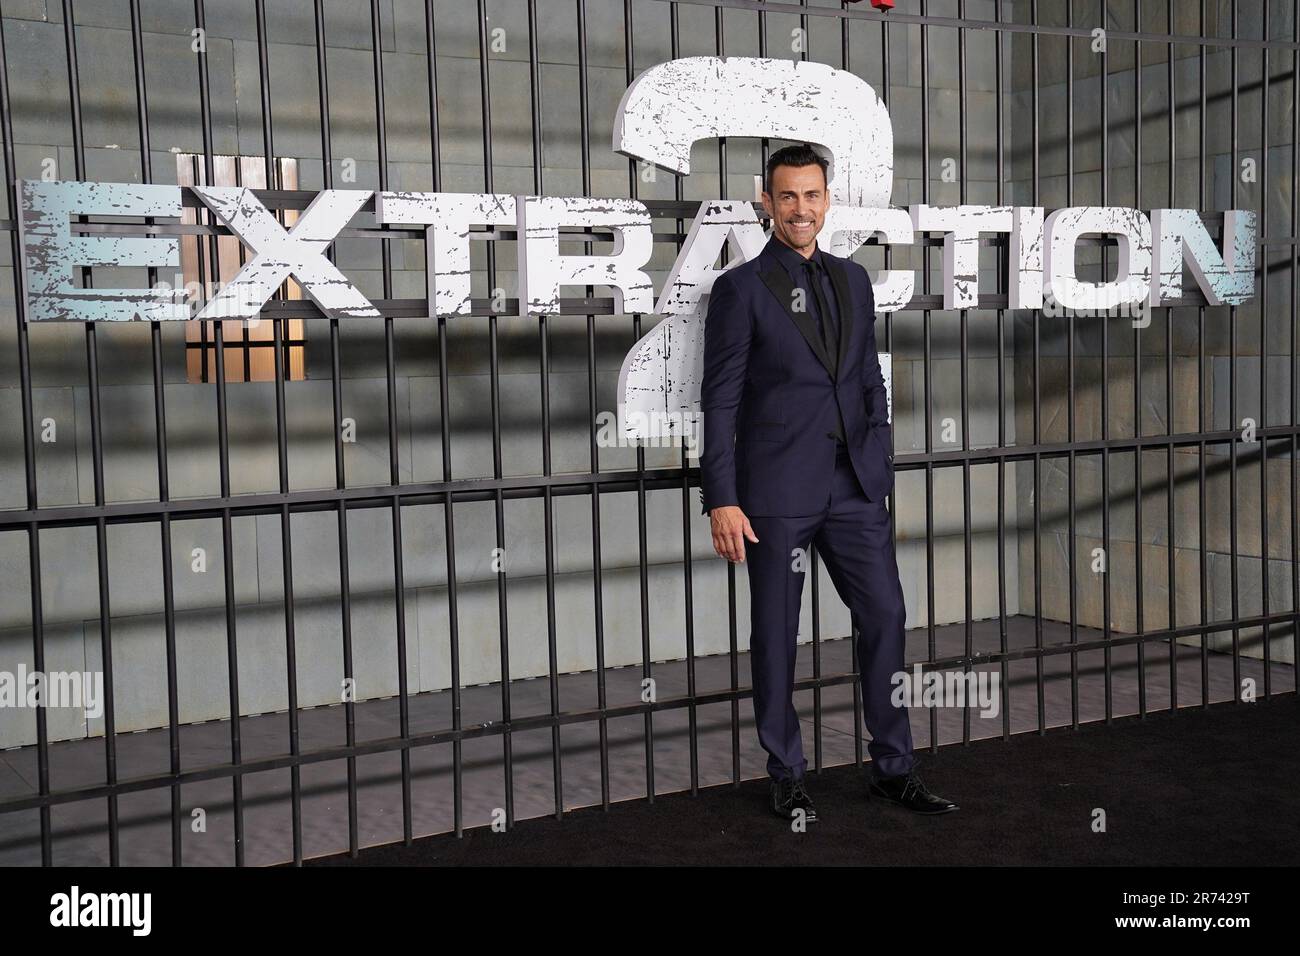 New York, NY, USA. 12th June, 2023. Daniel Bernhardt at arrivals for EXTRACTION 2 Premiere, Jazz At Lincoln Center, New York, NY June 12, 2023. Credit: Kristin Callahan/Everett Collection/Alamy Live News Stock Photo